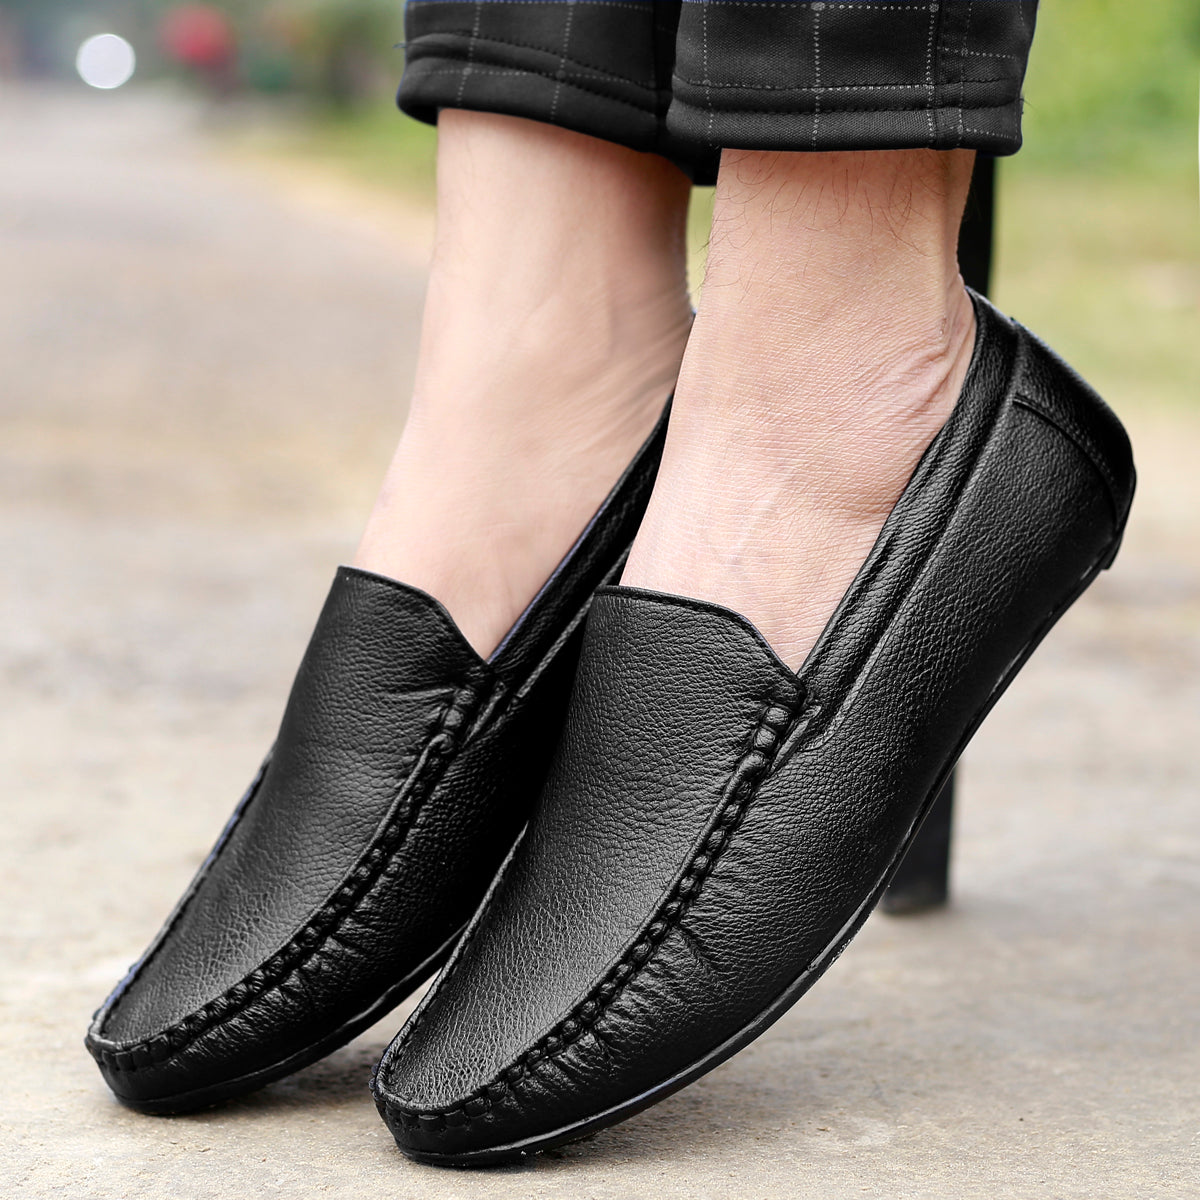 Men's Faux Leather Casual Stylish Loafers for all Seasons – BxxyShoes